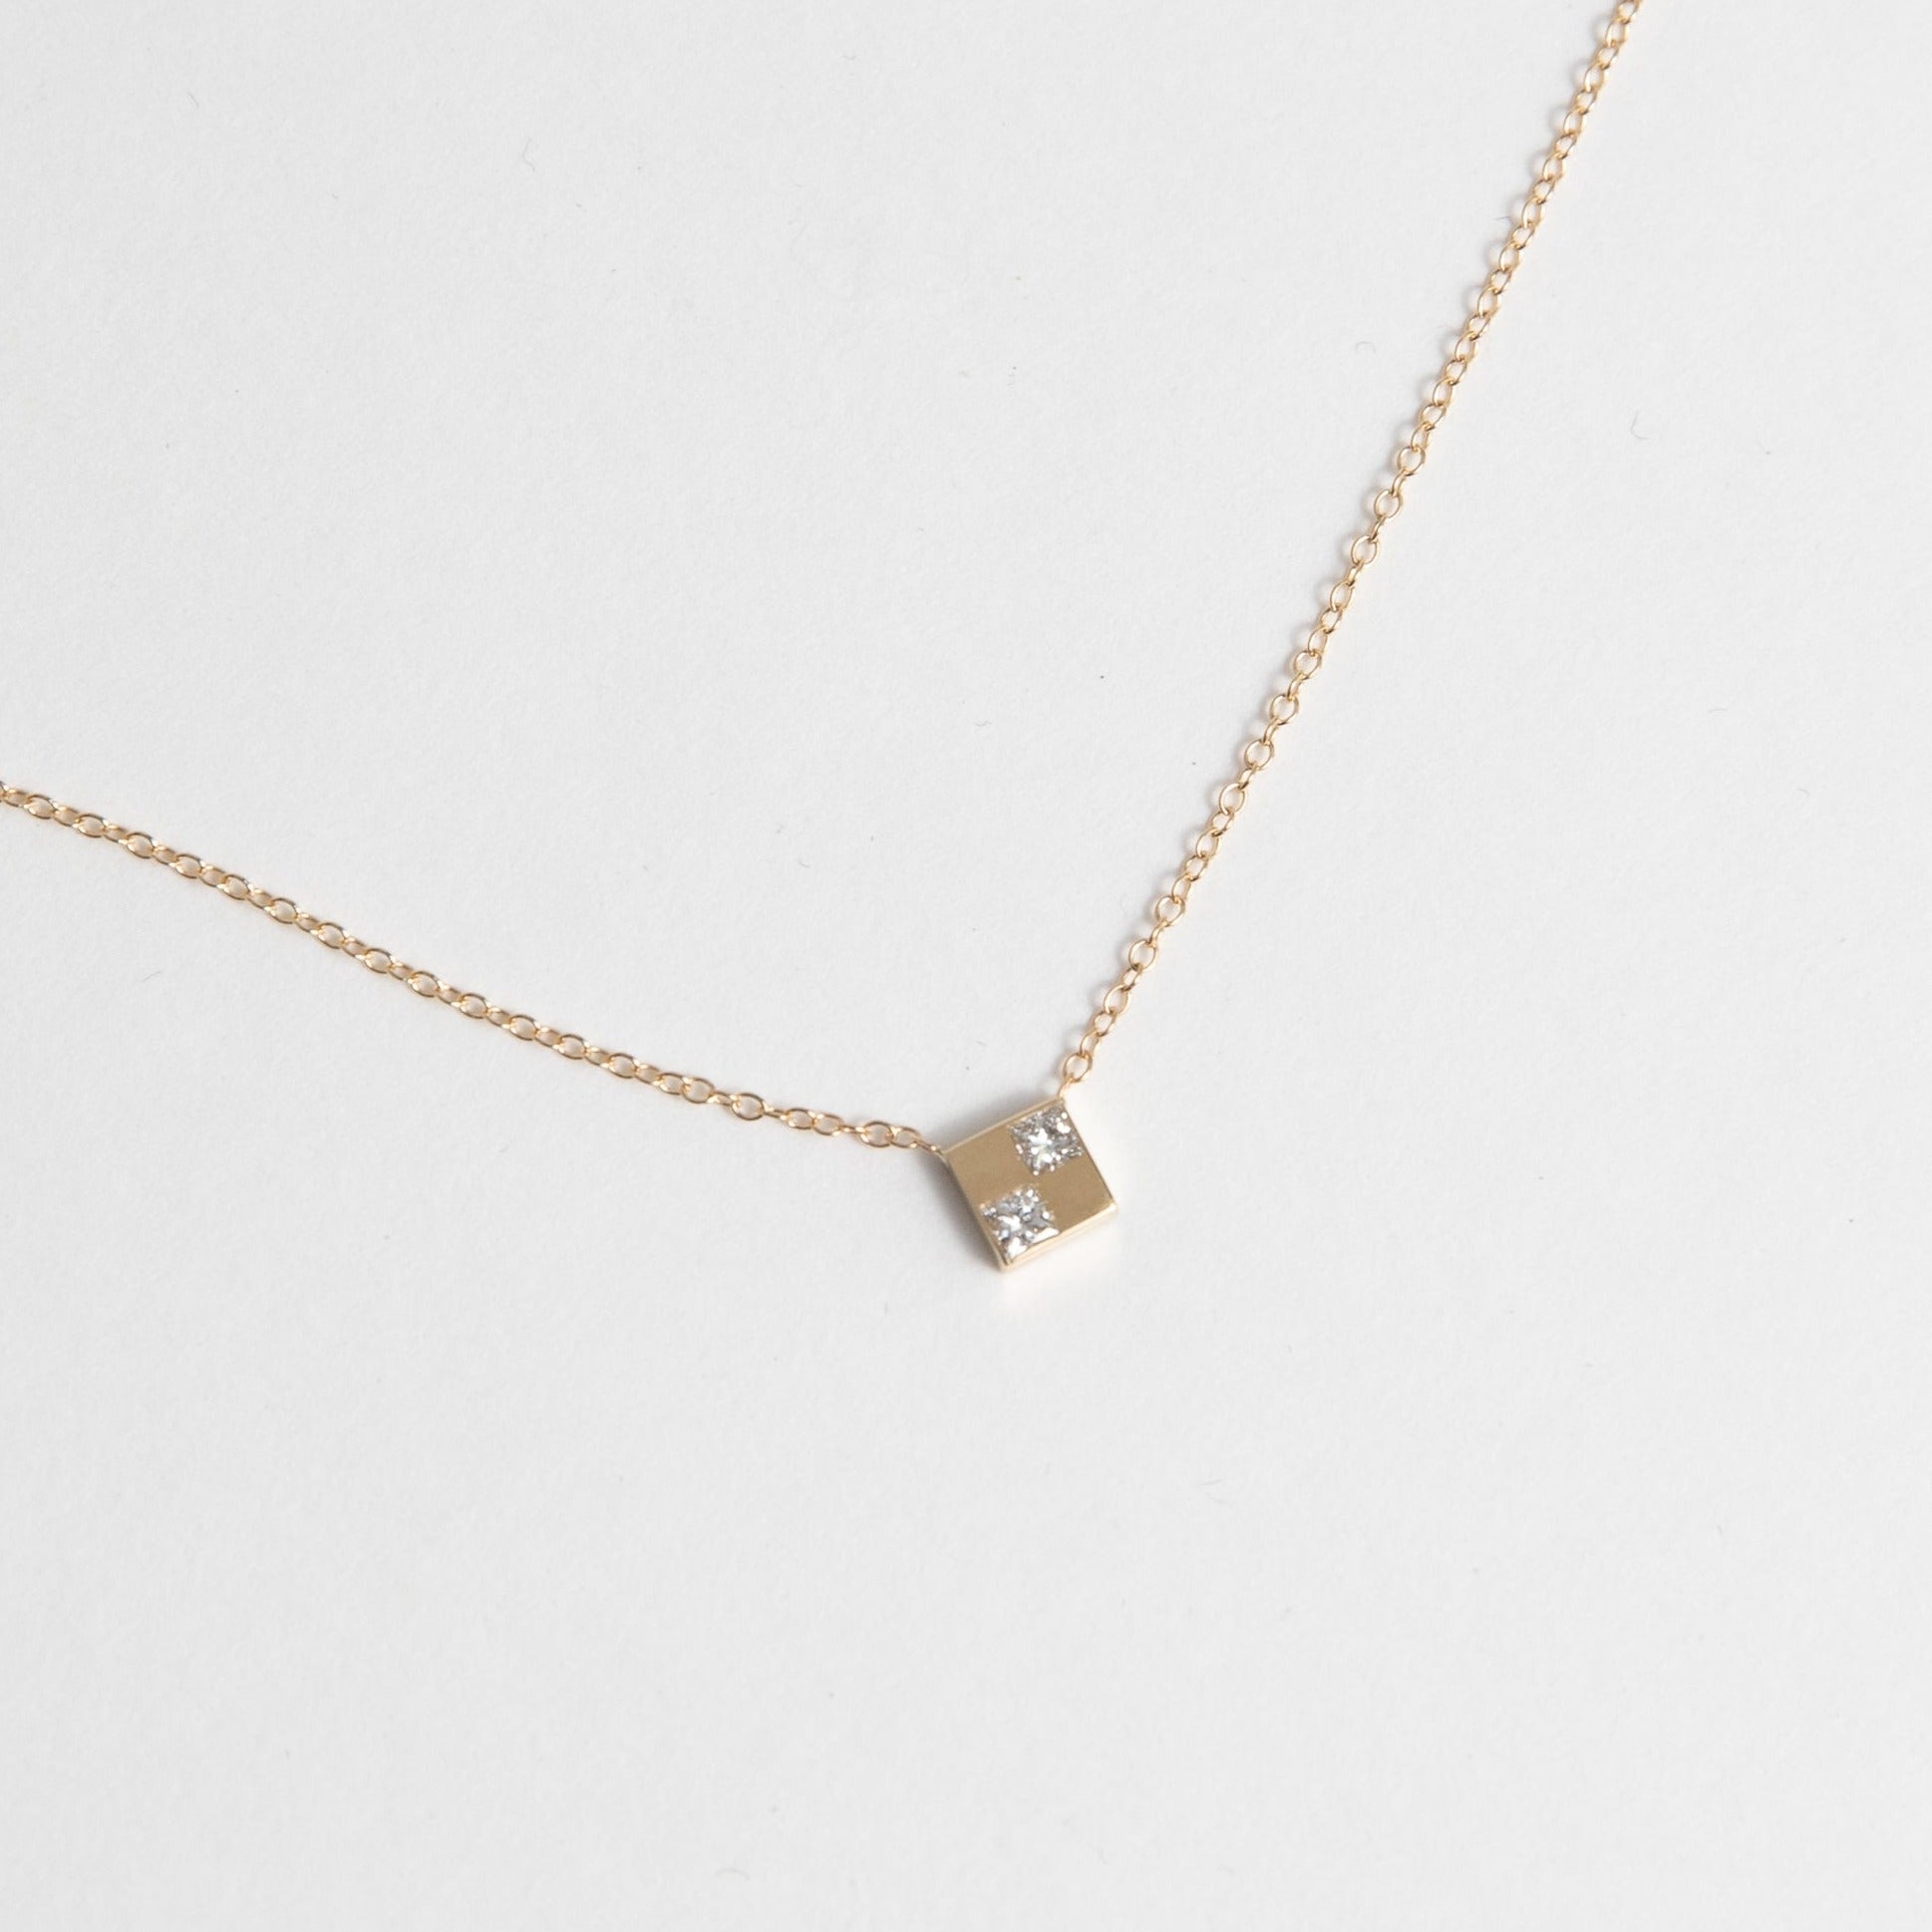 Sudu Designer Necklace in 14k Gold set with Princess Cut Square Diamonds By SHW Fine Jewelry NYC